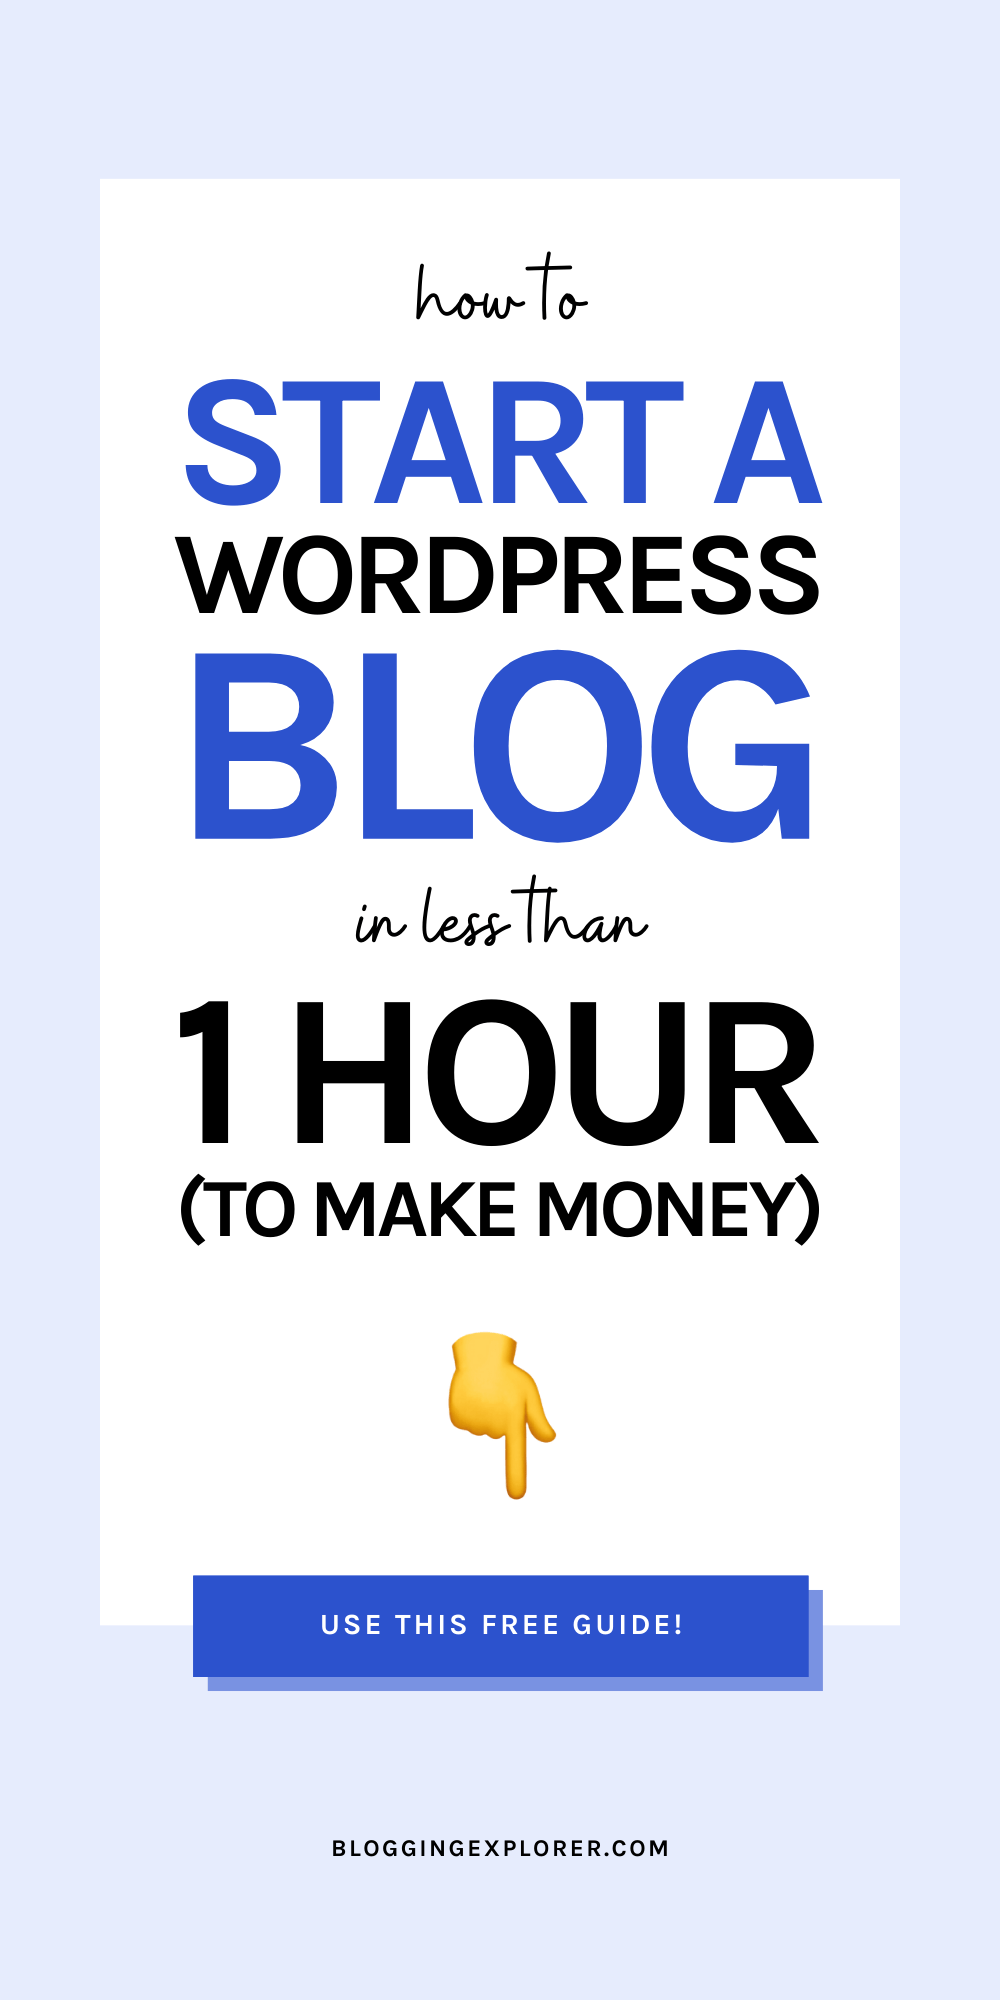 How to start a WordPress blog in less than 1 hour – Step-by-step tutorial for beginners